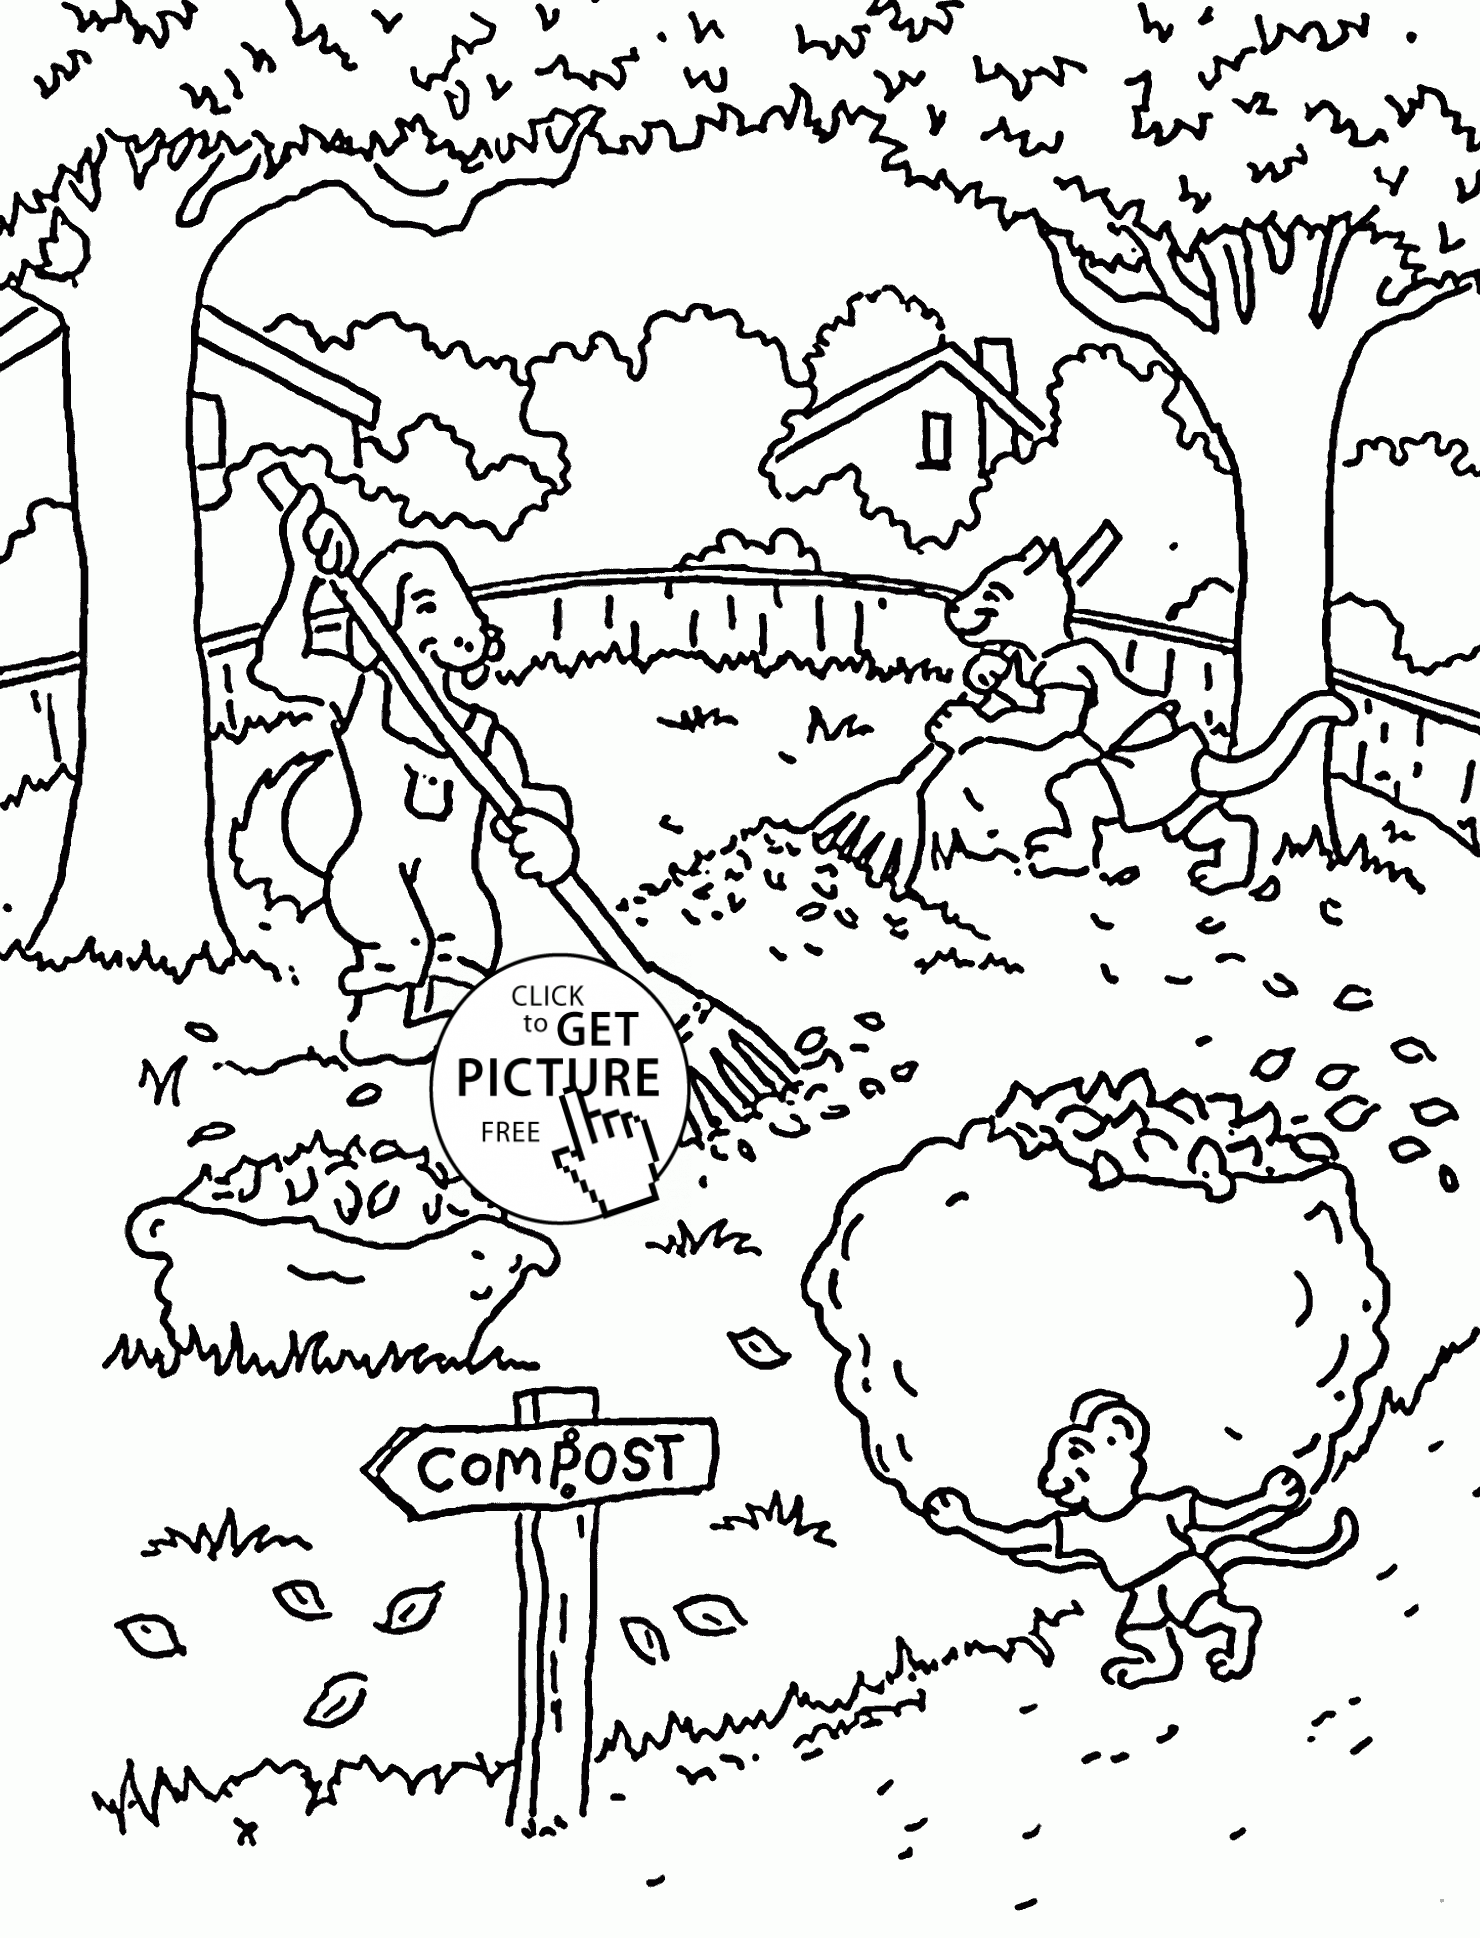 Animals Raking Fall Leaves coloring pages for kids, seasons printables free  - Wuppsy.com